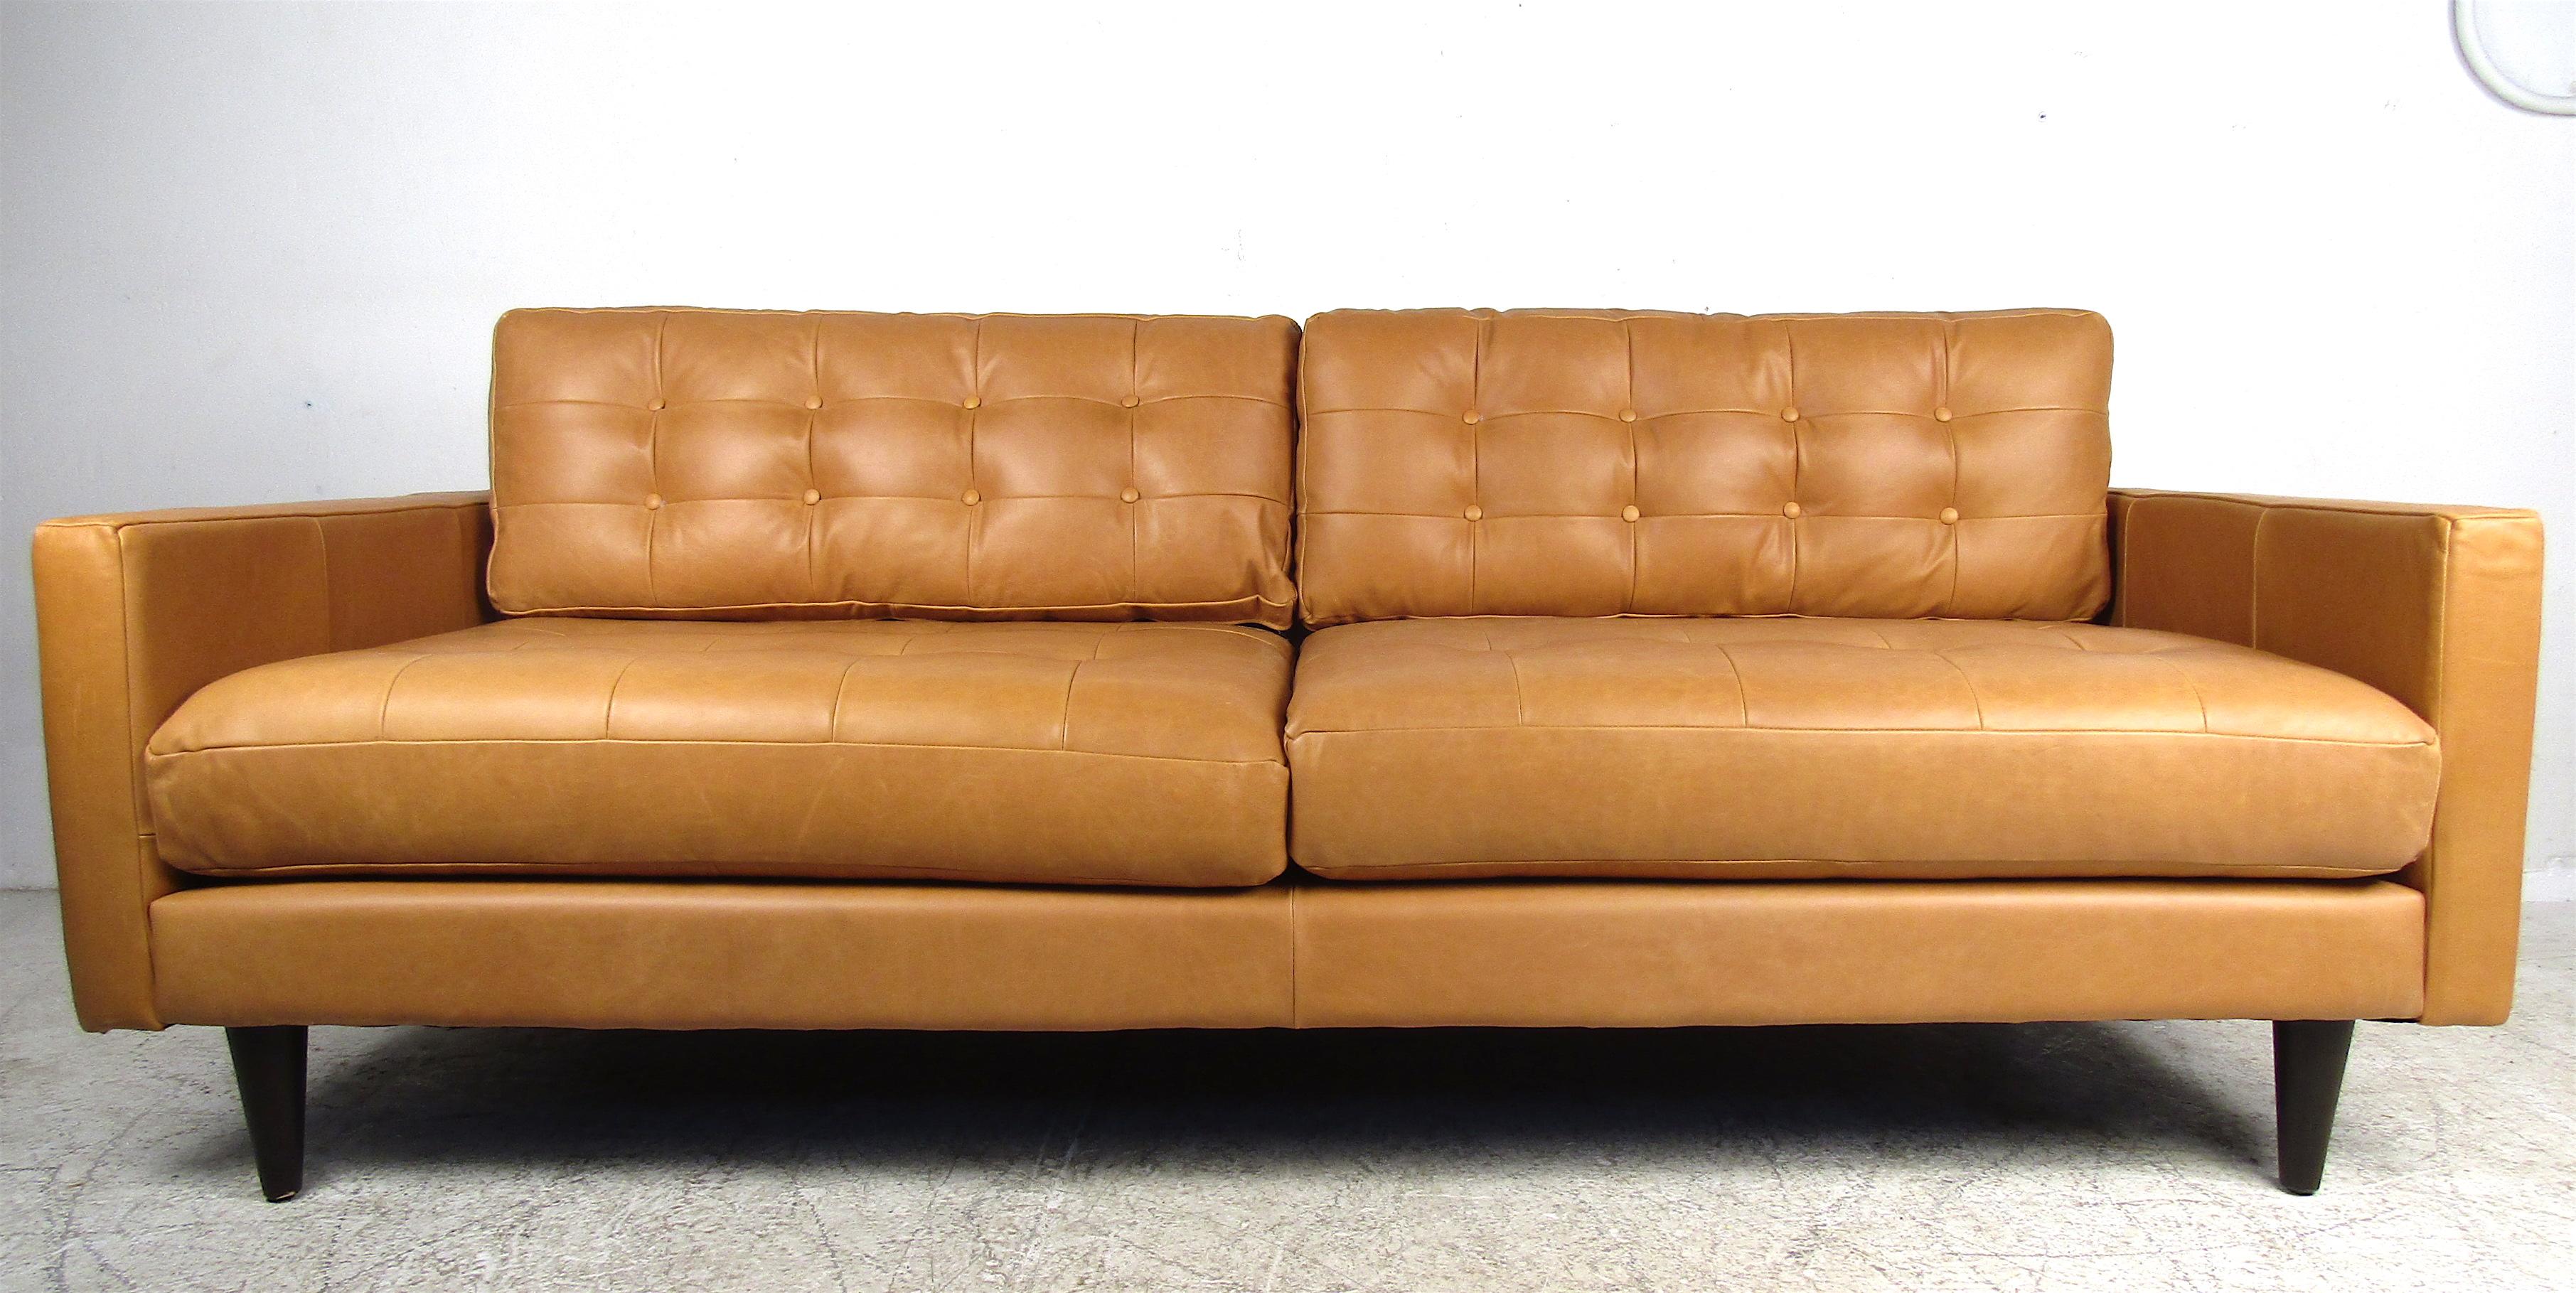 This beautiful contemporary modern sofa features four overstuffed removable tufted cushions. A comfortable a stylish piece that sits on stubby black tapered wood legs. An elaborate orange color that is sure to make a lasting impression in any